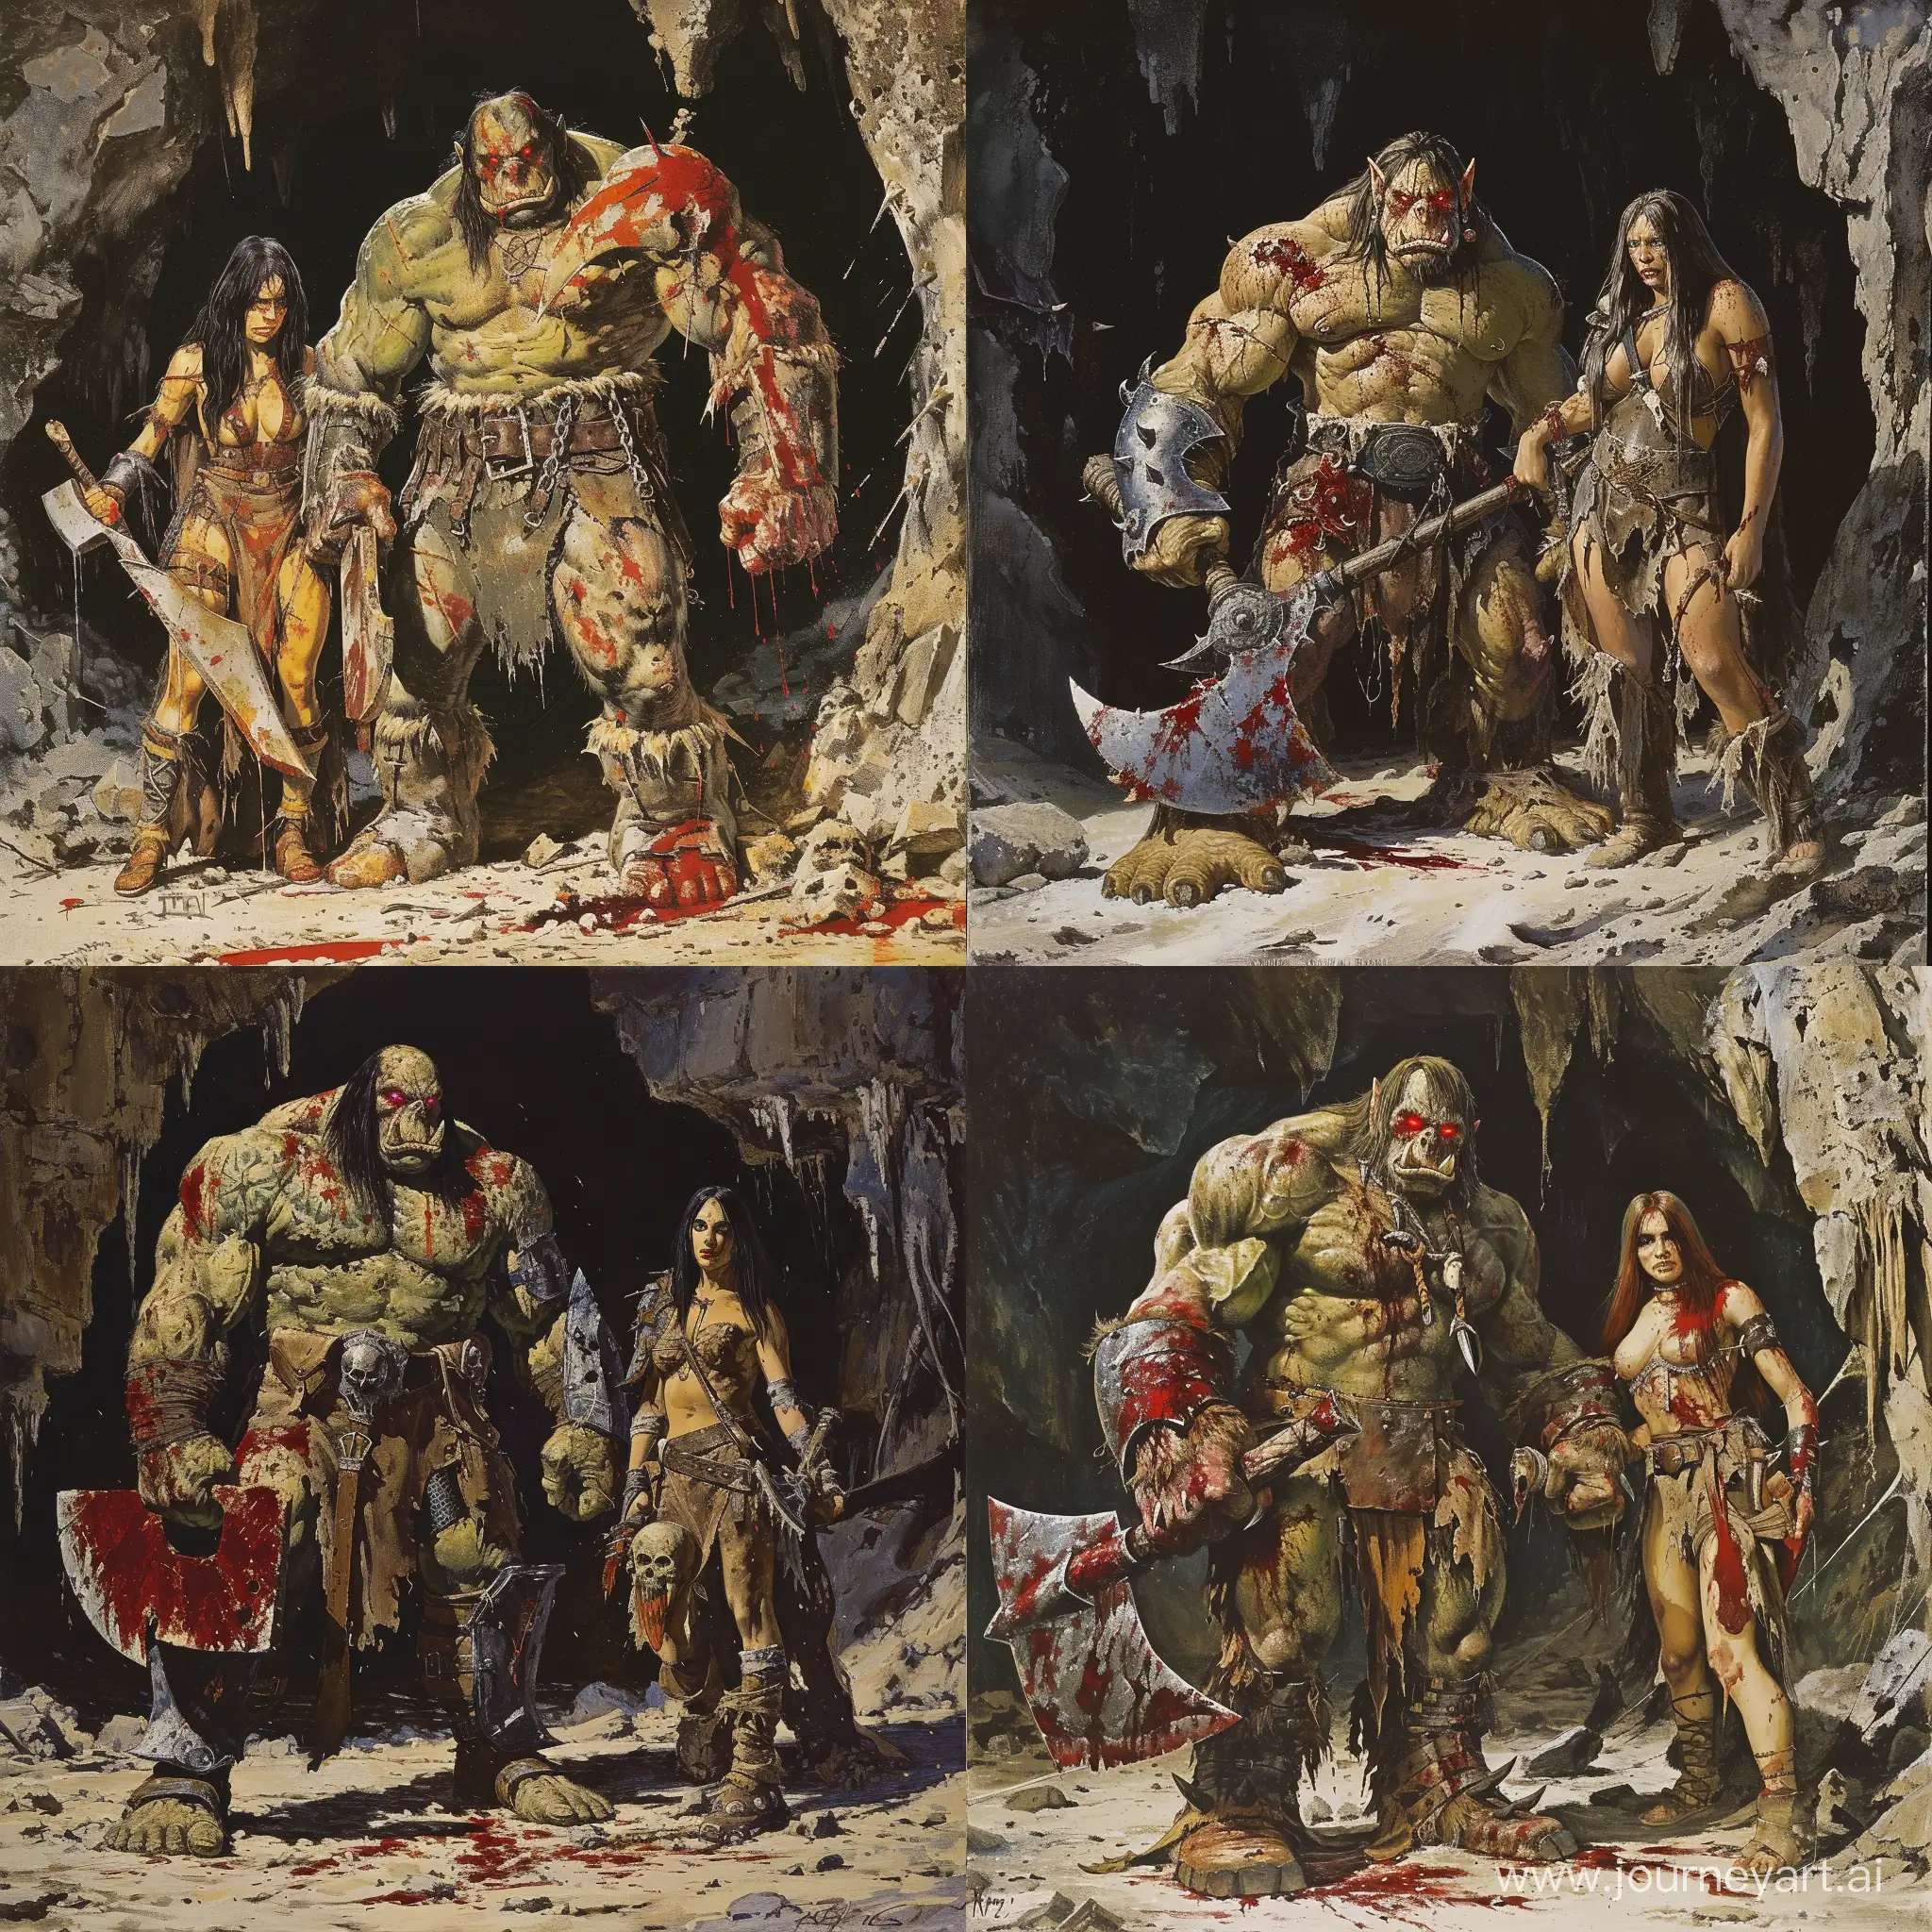  A hulking and scarred orc, with a menacing presence, Crimson eyes that burn with a ferocious intensity, Draped in the torn remains of a once-proud knight's armor, wielding a massive, bloodstained cleaver, accompanied by a woman orc which is very beautiful but deadly, wears a torned up clothes in a cave, 1970's dark fantasy style, grim dark, gritty, detailed